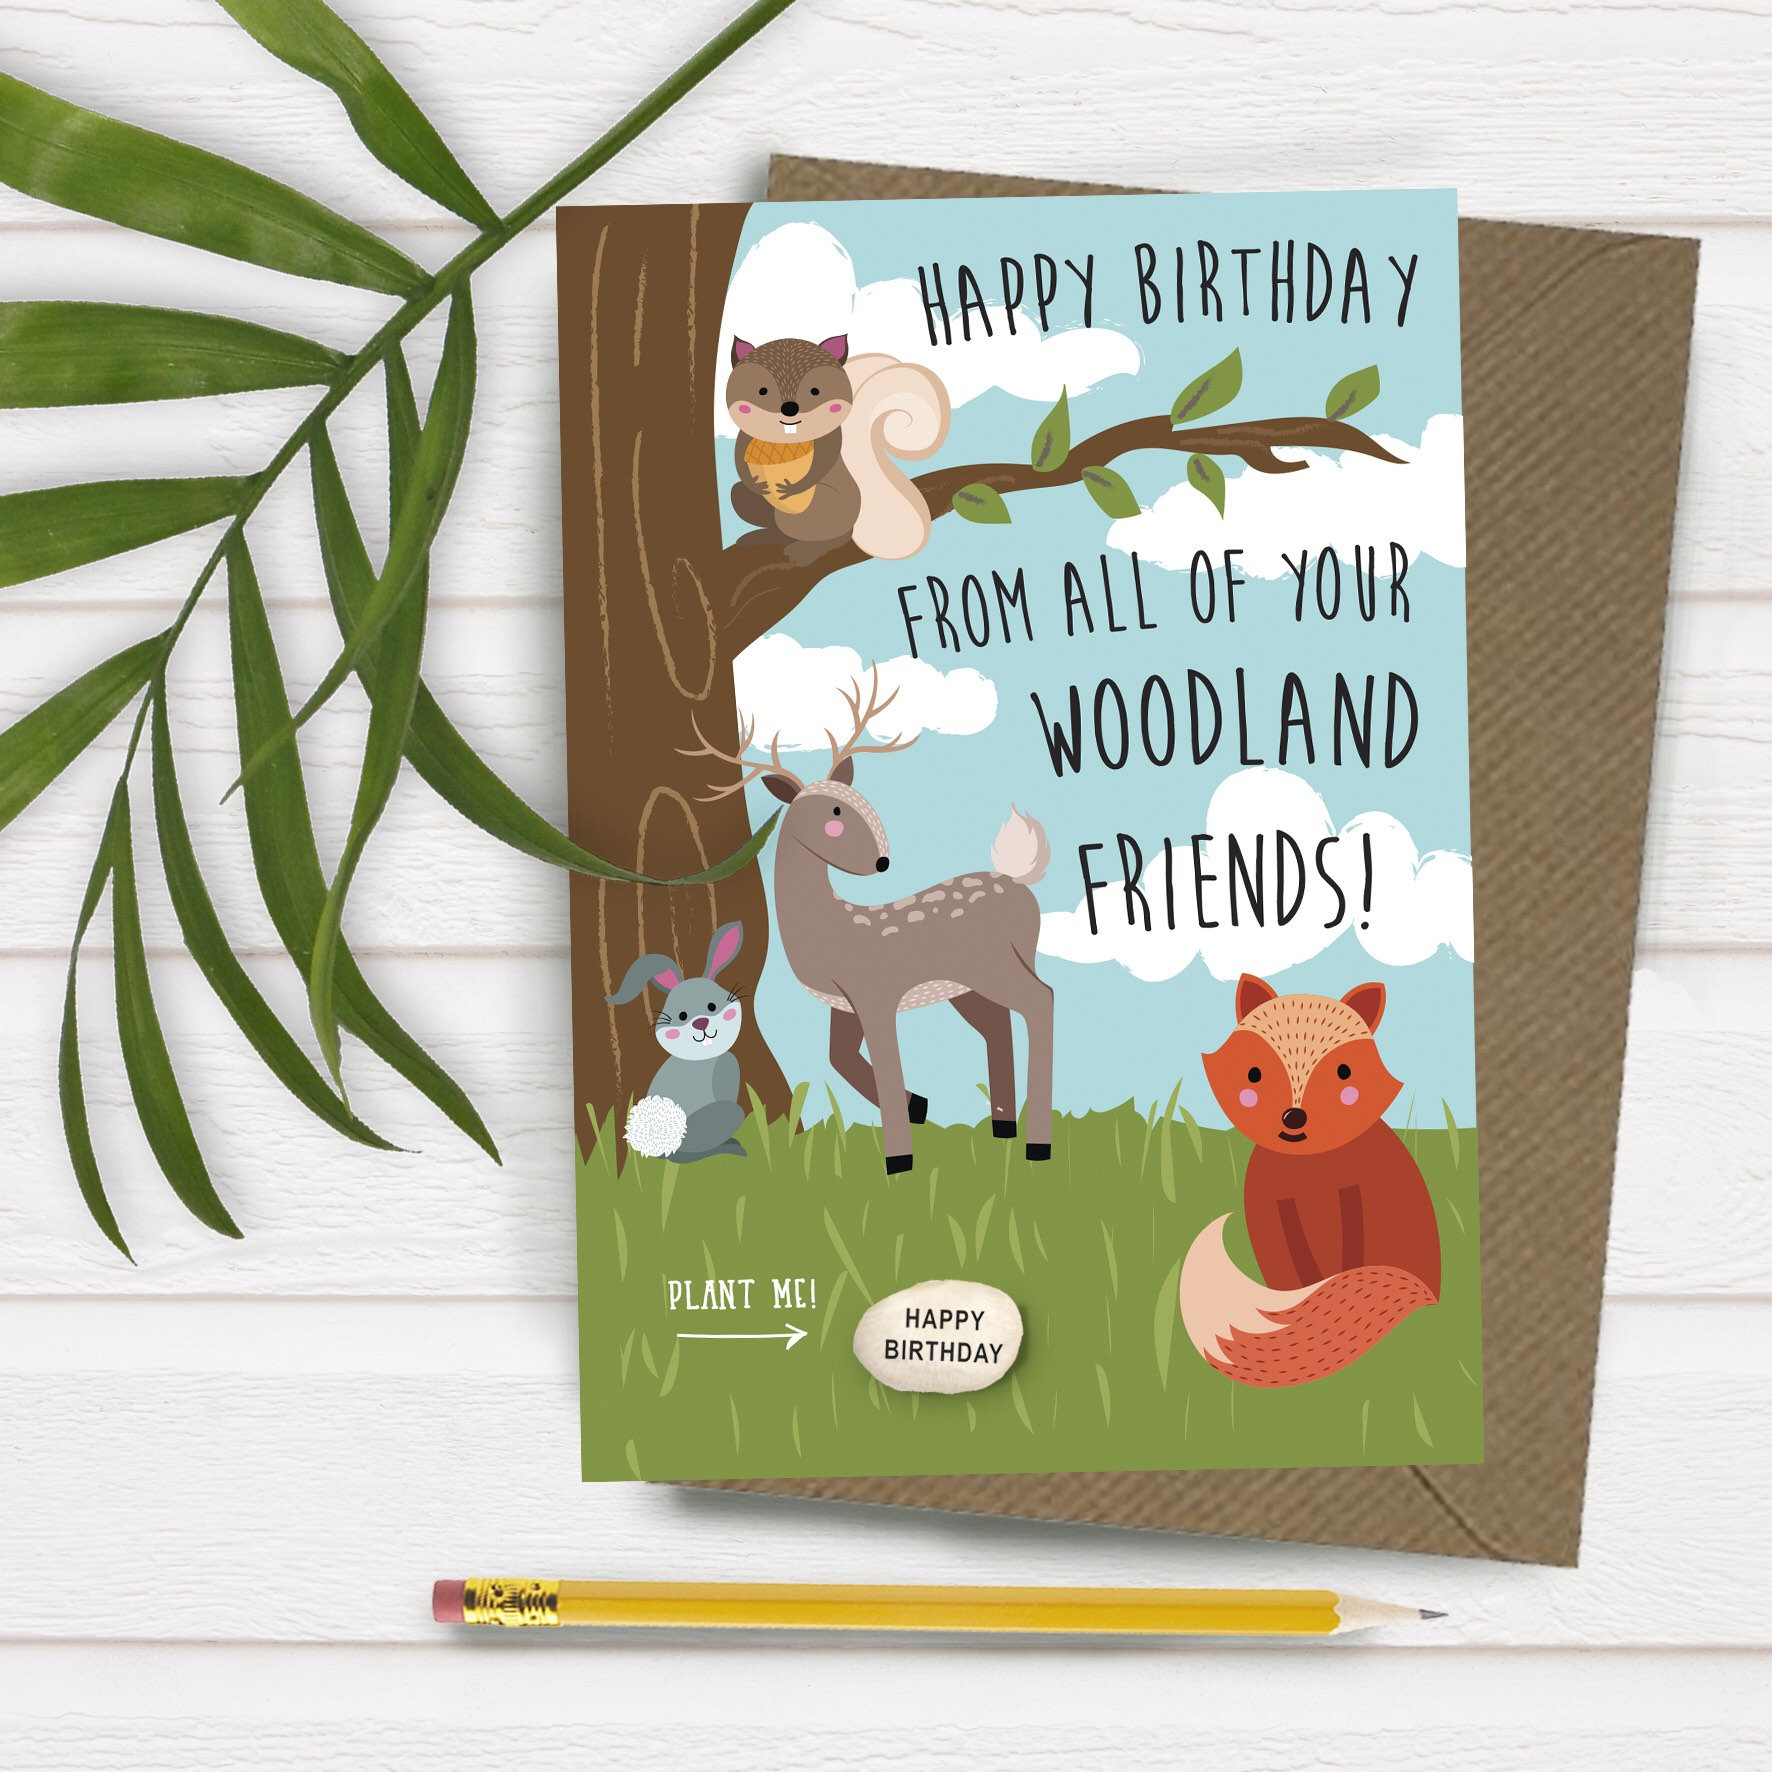 Cute Birthday Card Ideas For Friend Magical Birthday Woodland Friends Card Cute Birthday Card Forest Animals Birthday Card For Girl Birthday Card For Boygifts For Children